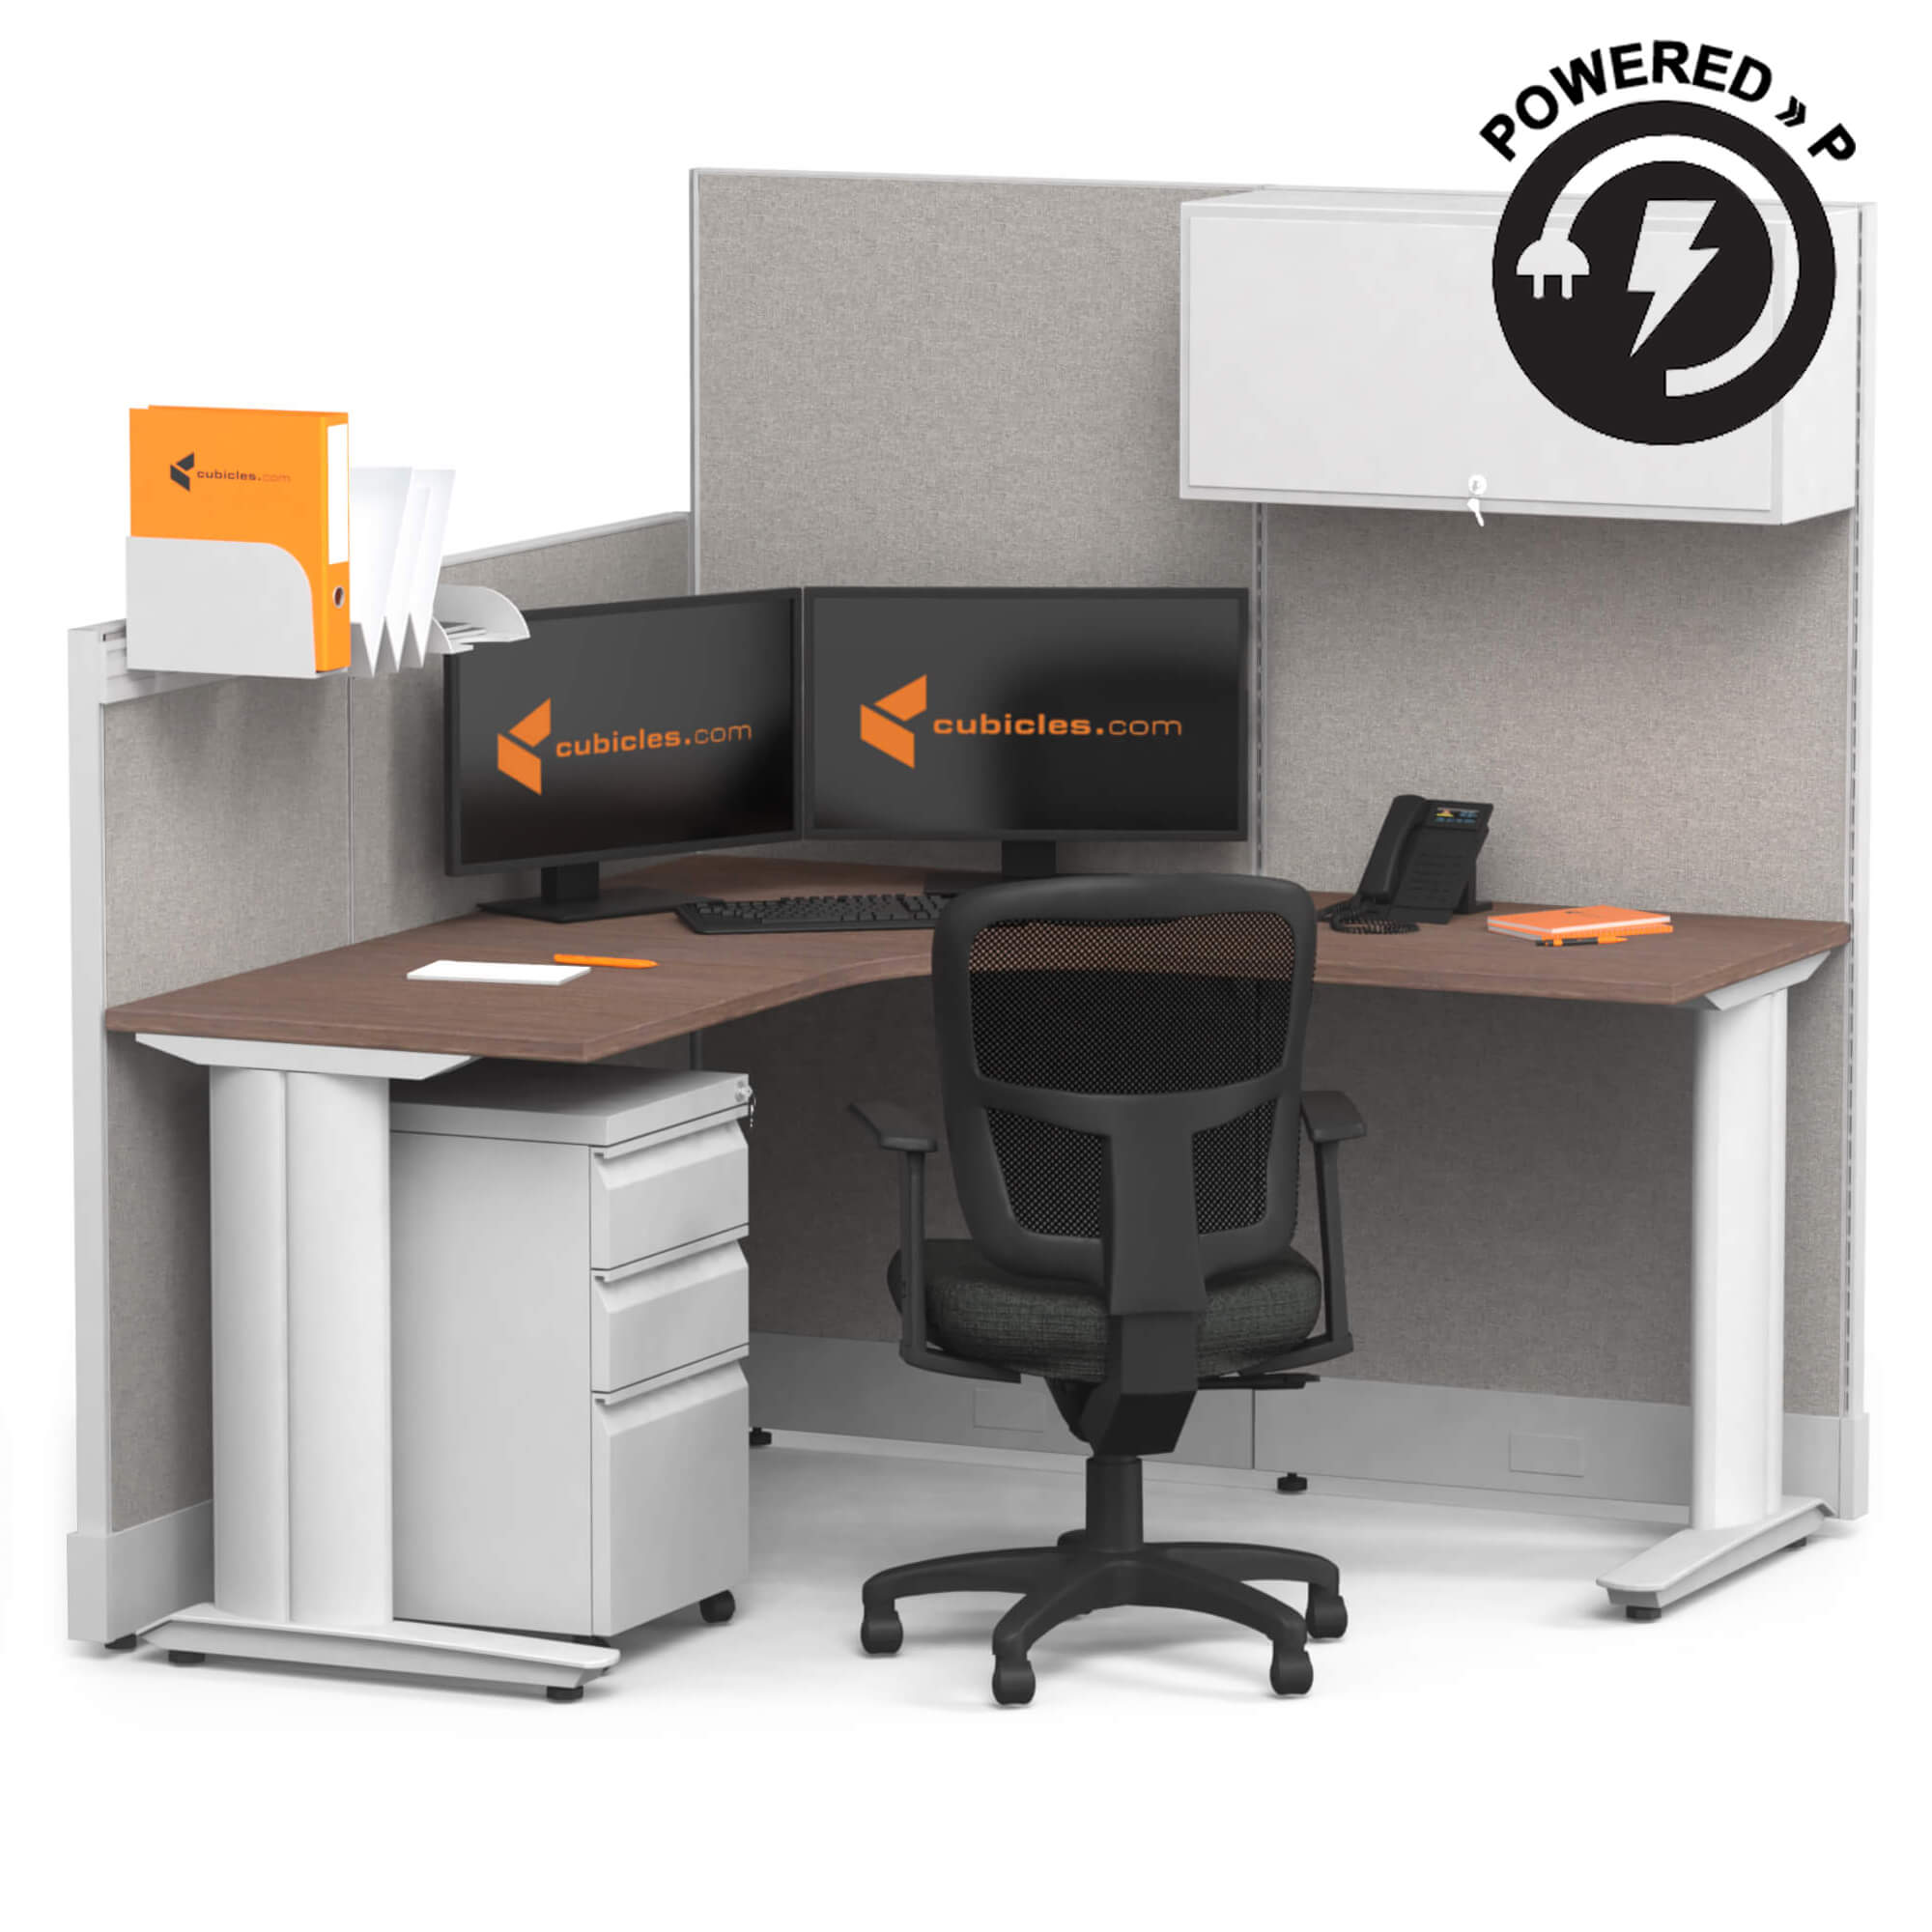 cubicle-desk-l-shaped-with-storage-1pack-powered.jpg